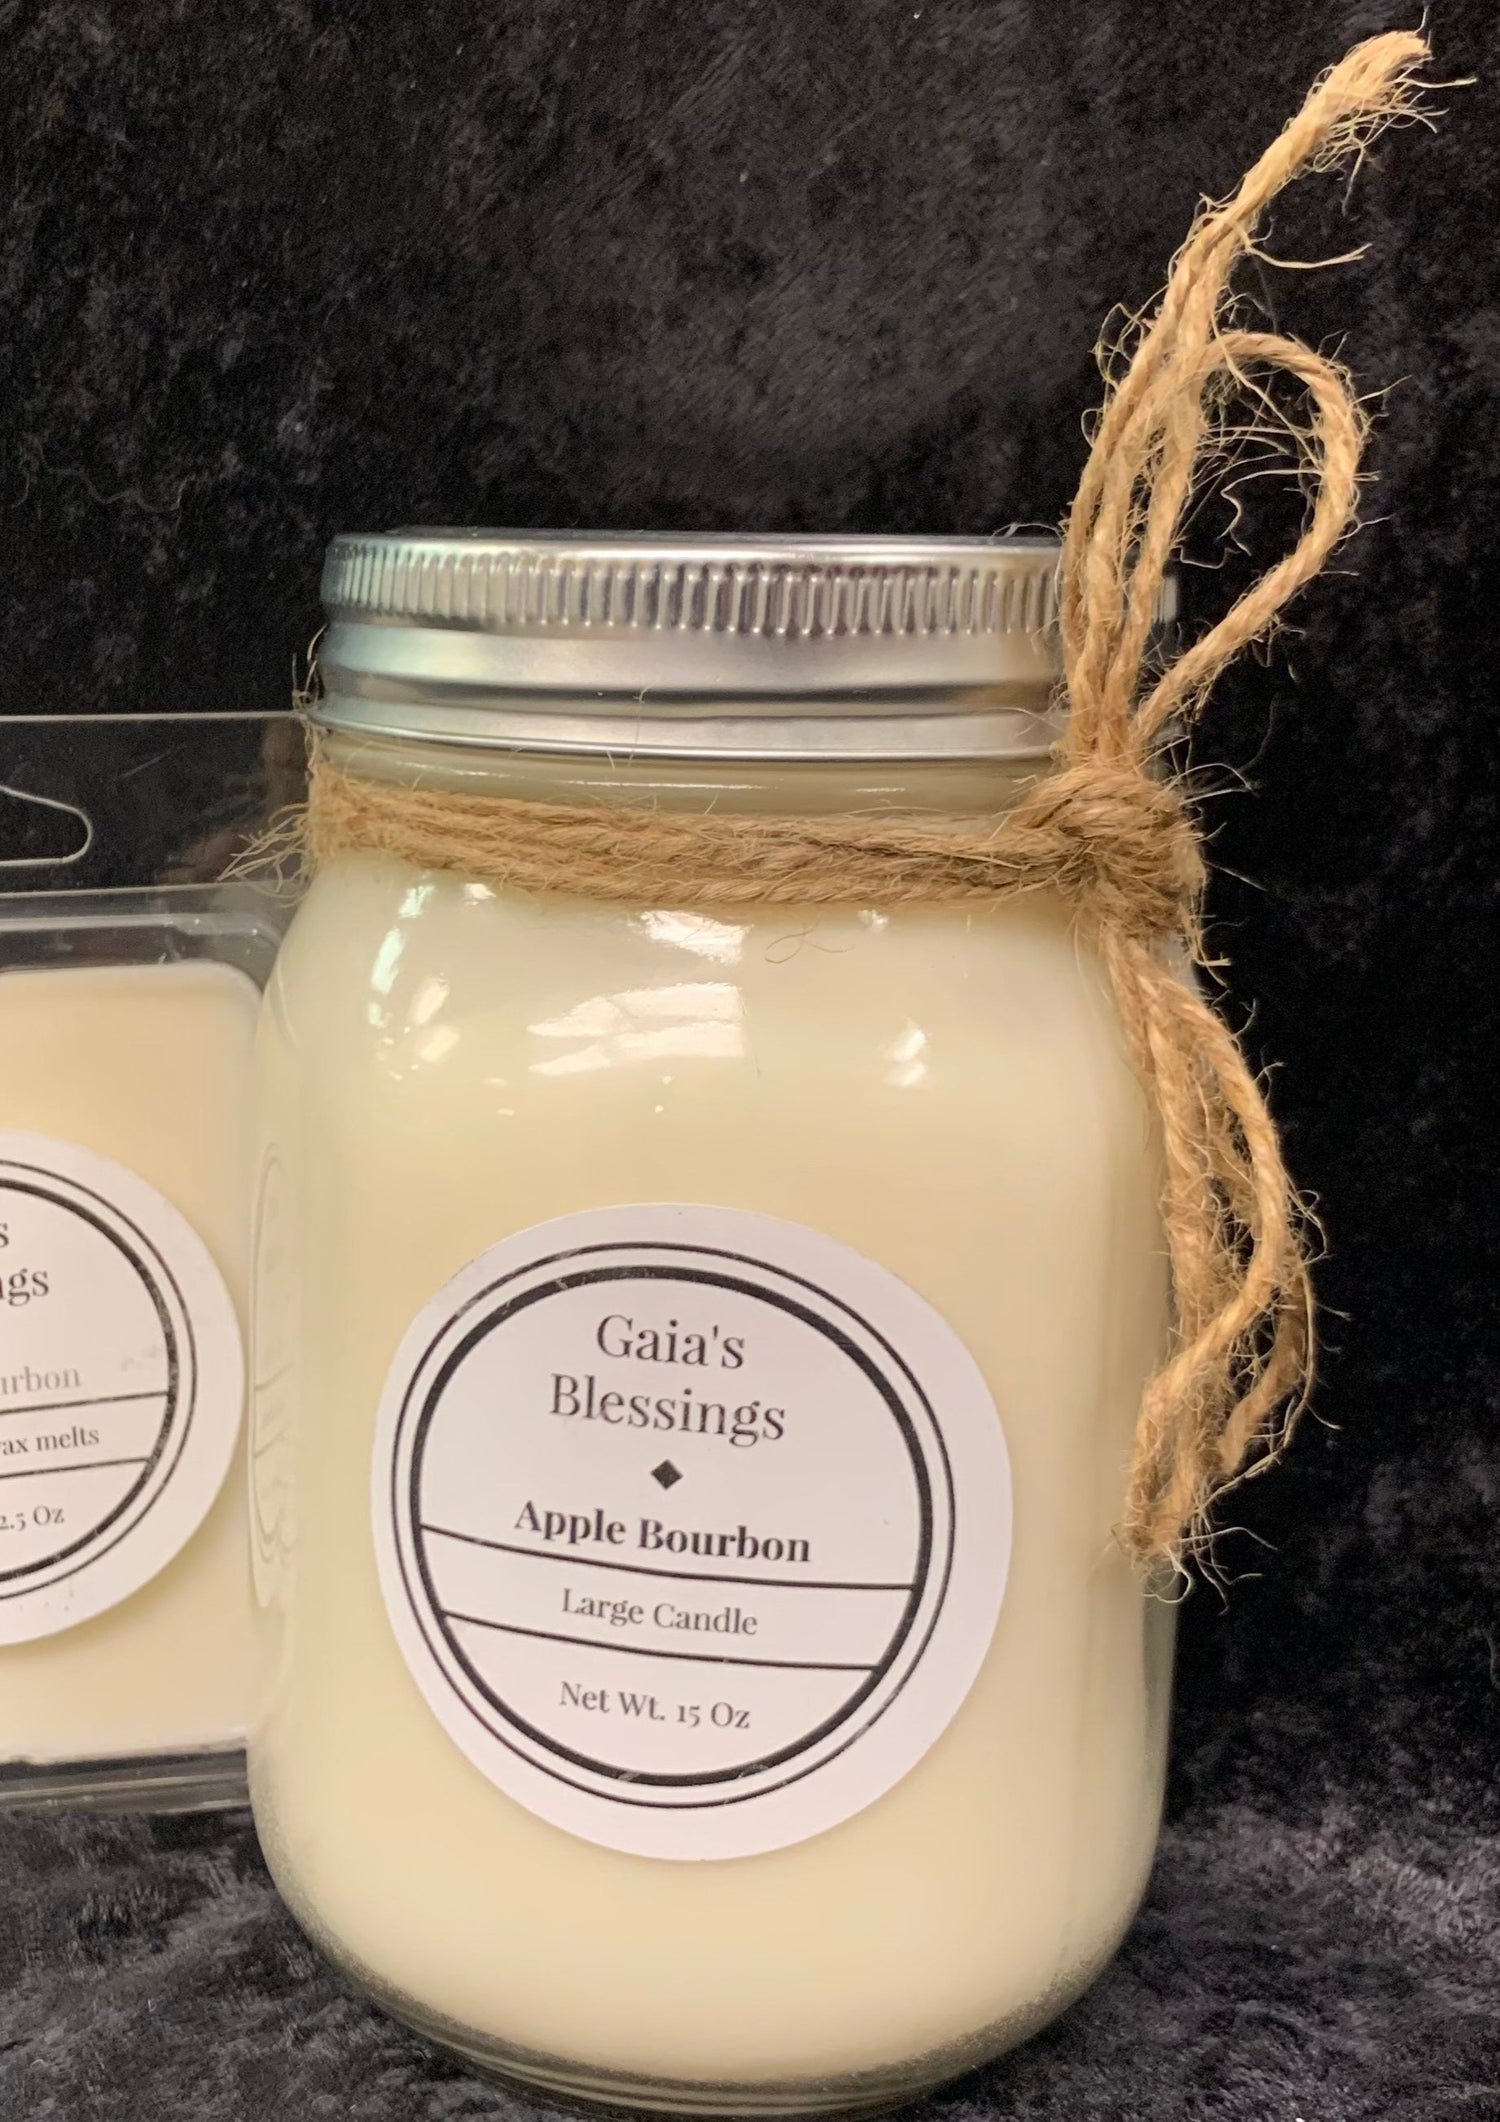 Apple Bourbon Eco-friendly soy candle